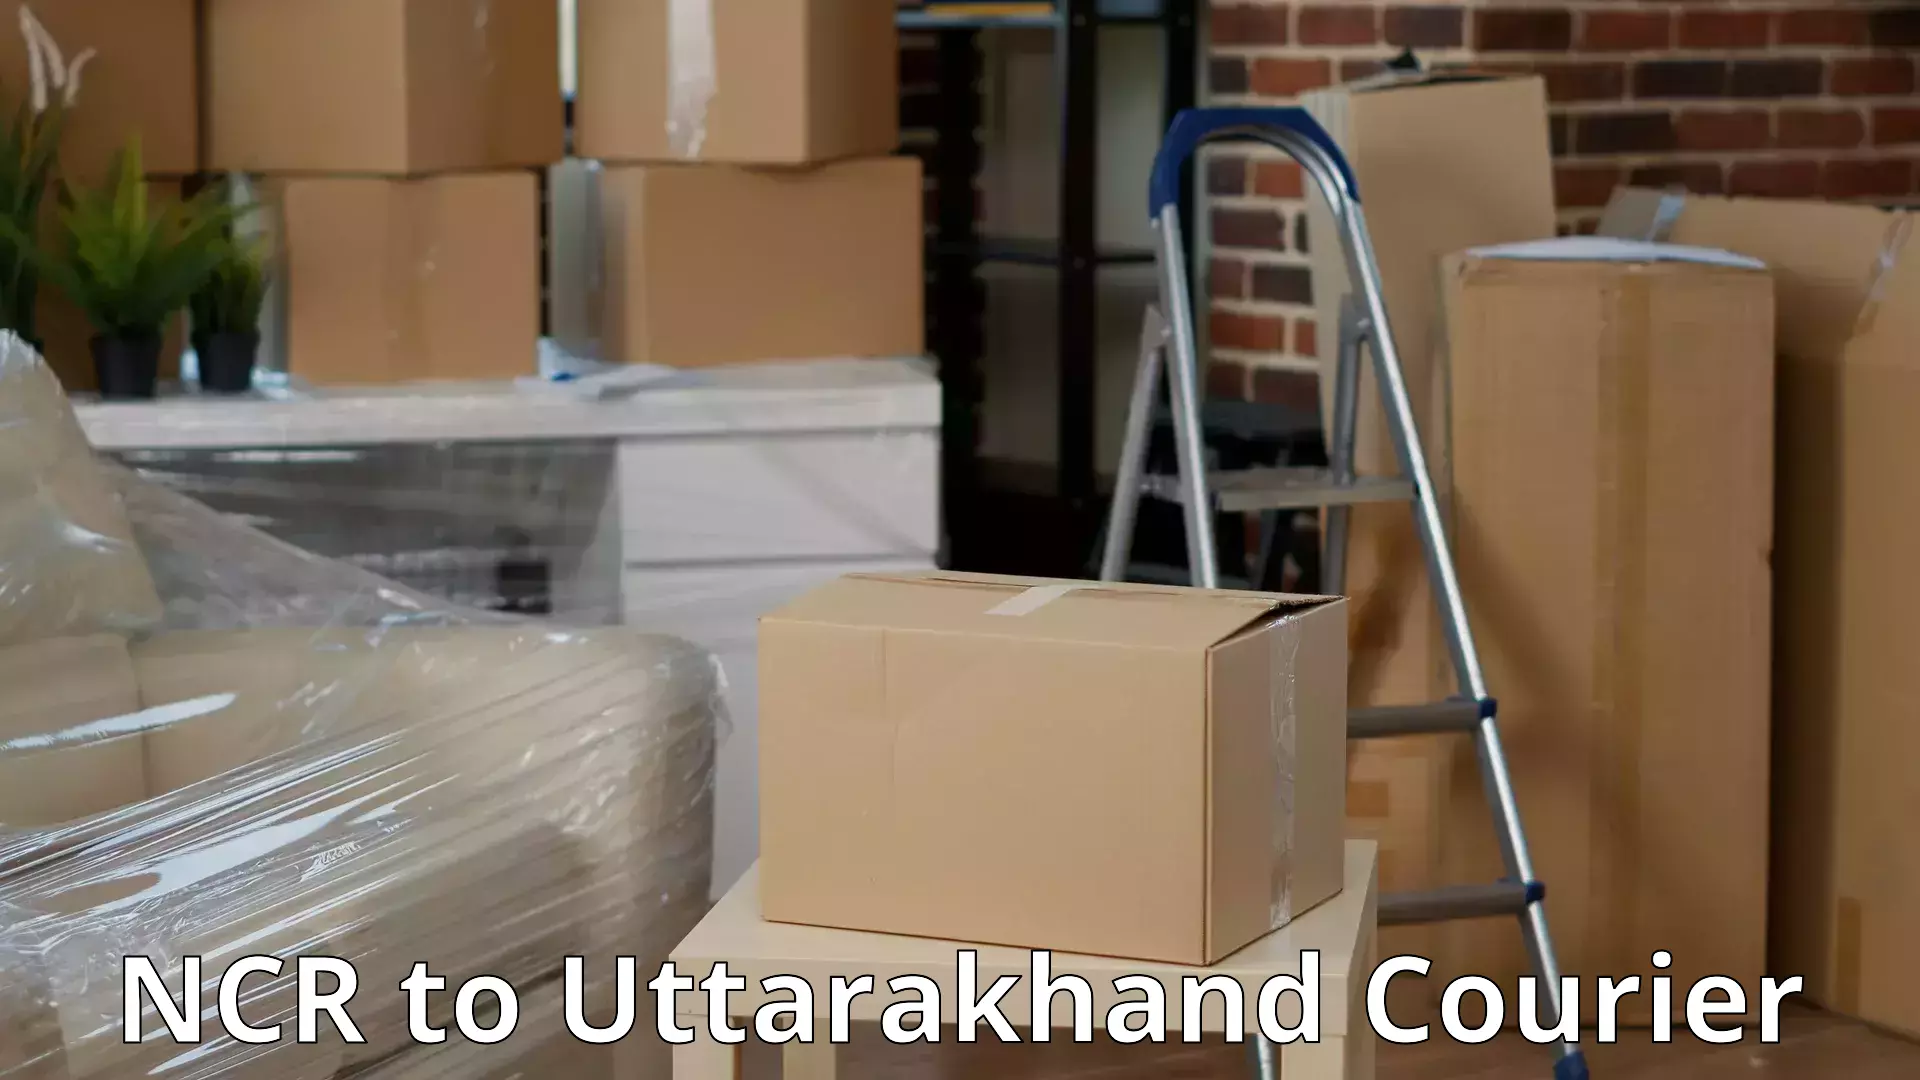 Moving and packing experts NCR to Lansdowne